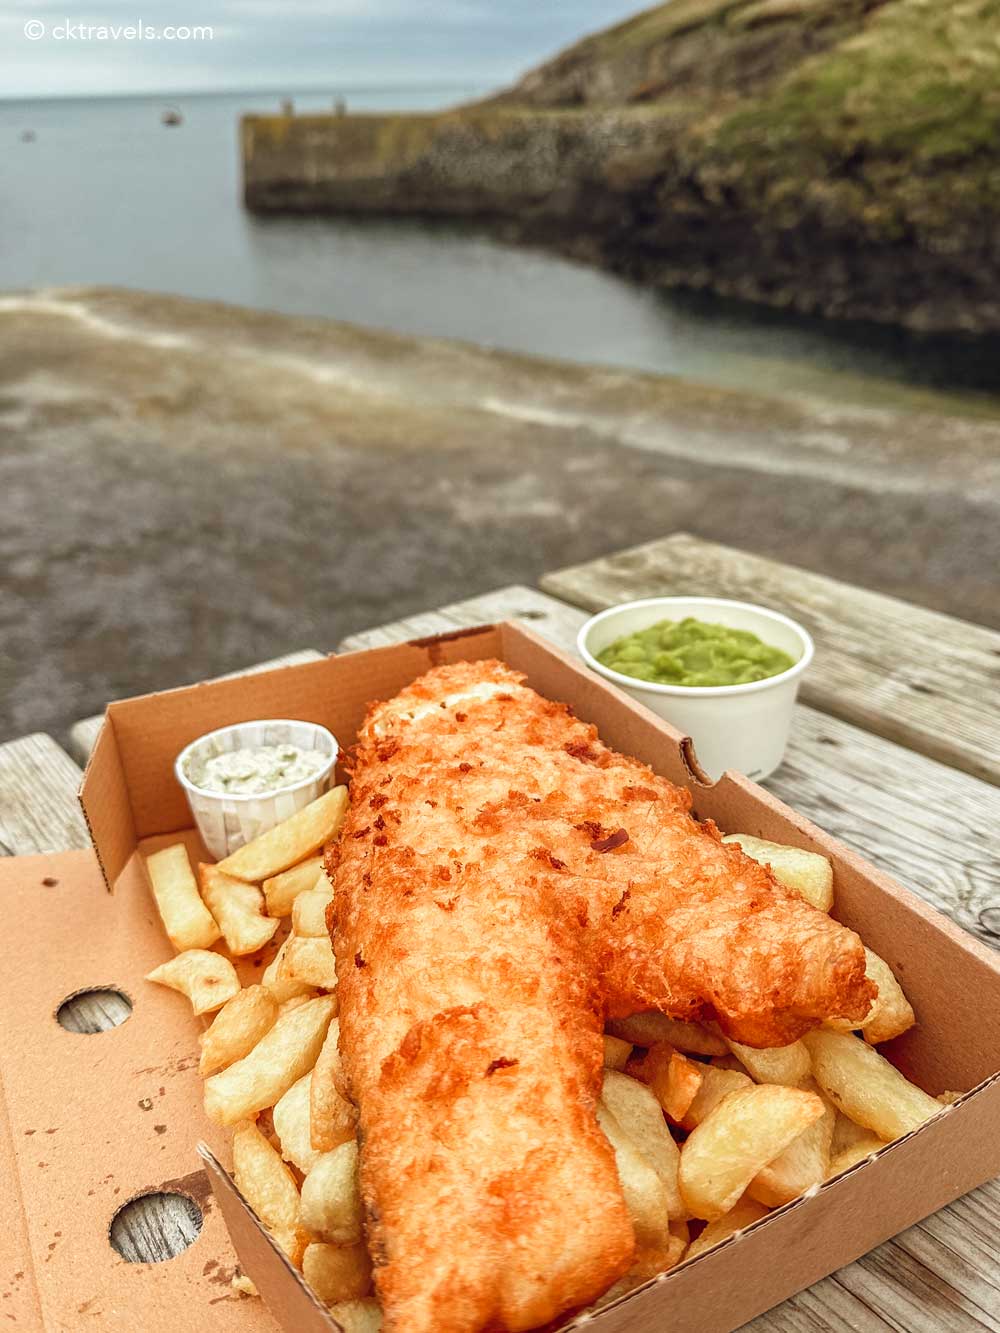 Fish and chips Porthgain Wales